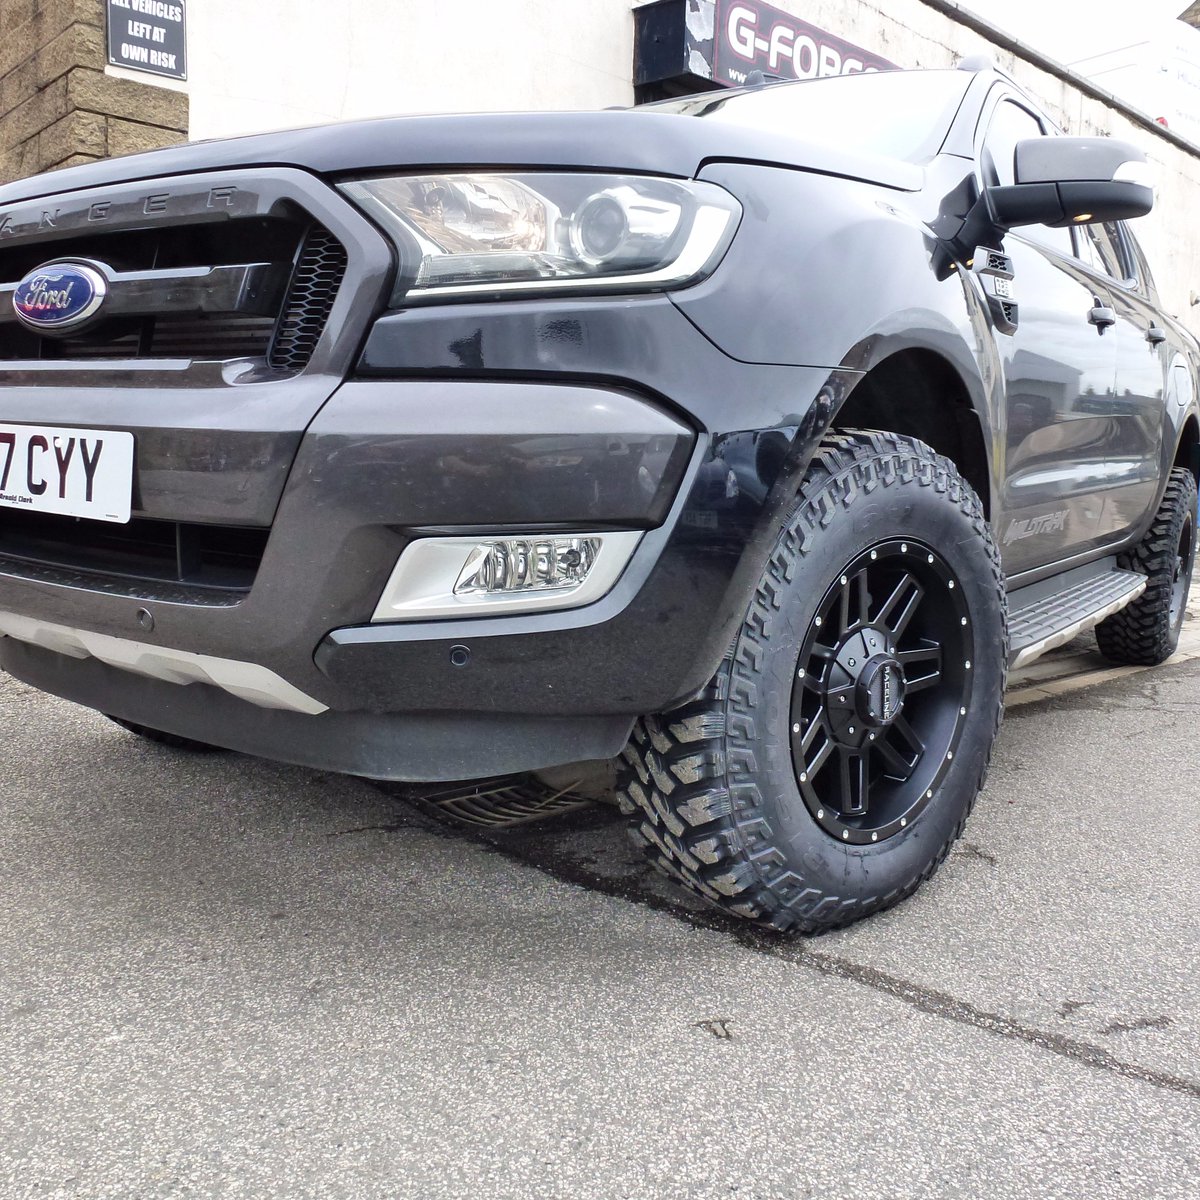 G Force 4x4 Wheels And Tyres For Ford Ranger And Most 4x4 From G Force 4x4 Fordranger Gforce4x4 Customtruck 4x4wheels Fordraptor T Co 4zj5lqngpb